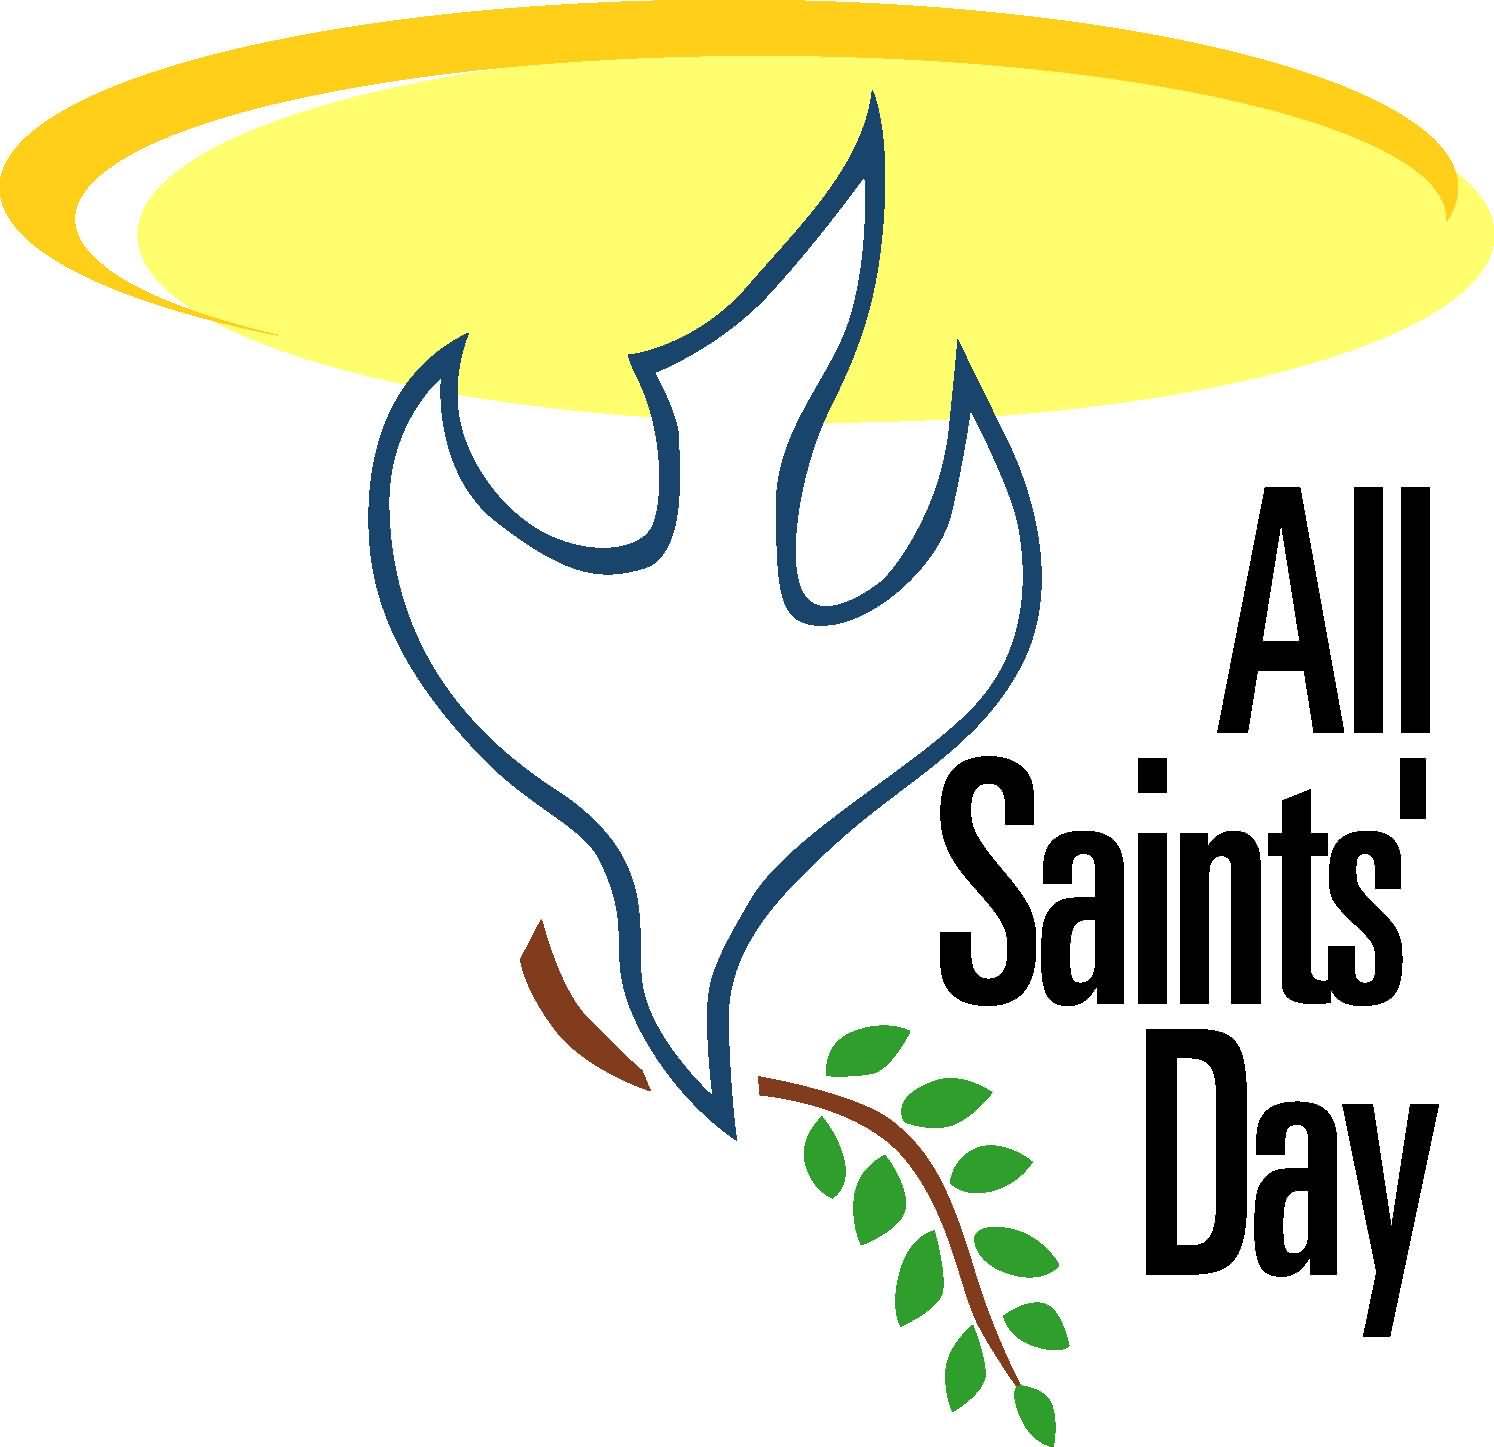 All Saints Day Flying Dove And Olive Branch Illustration